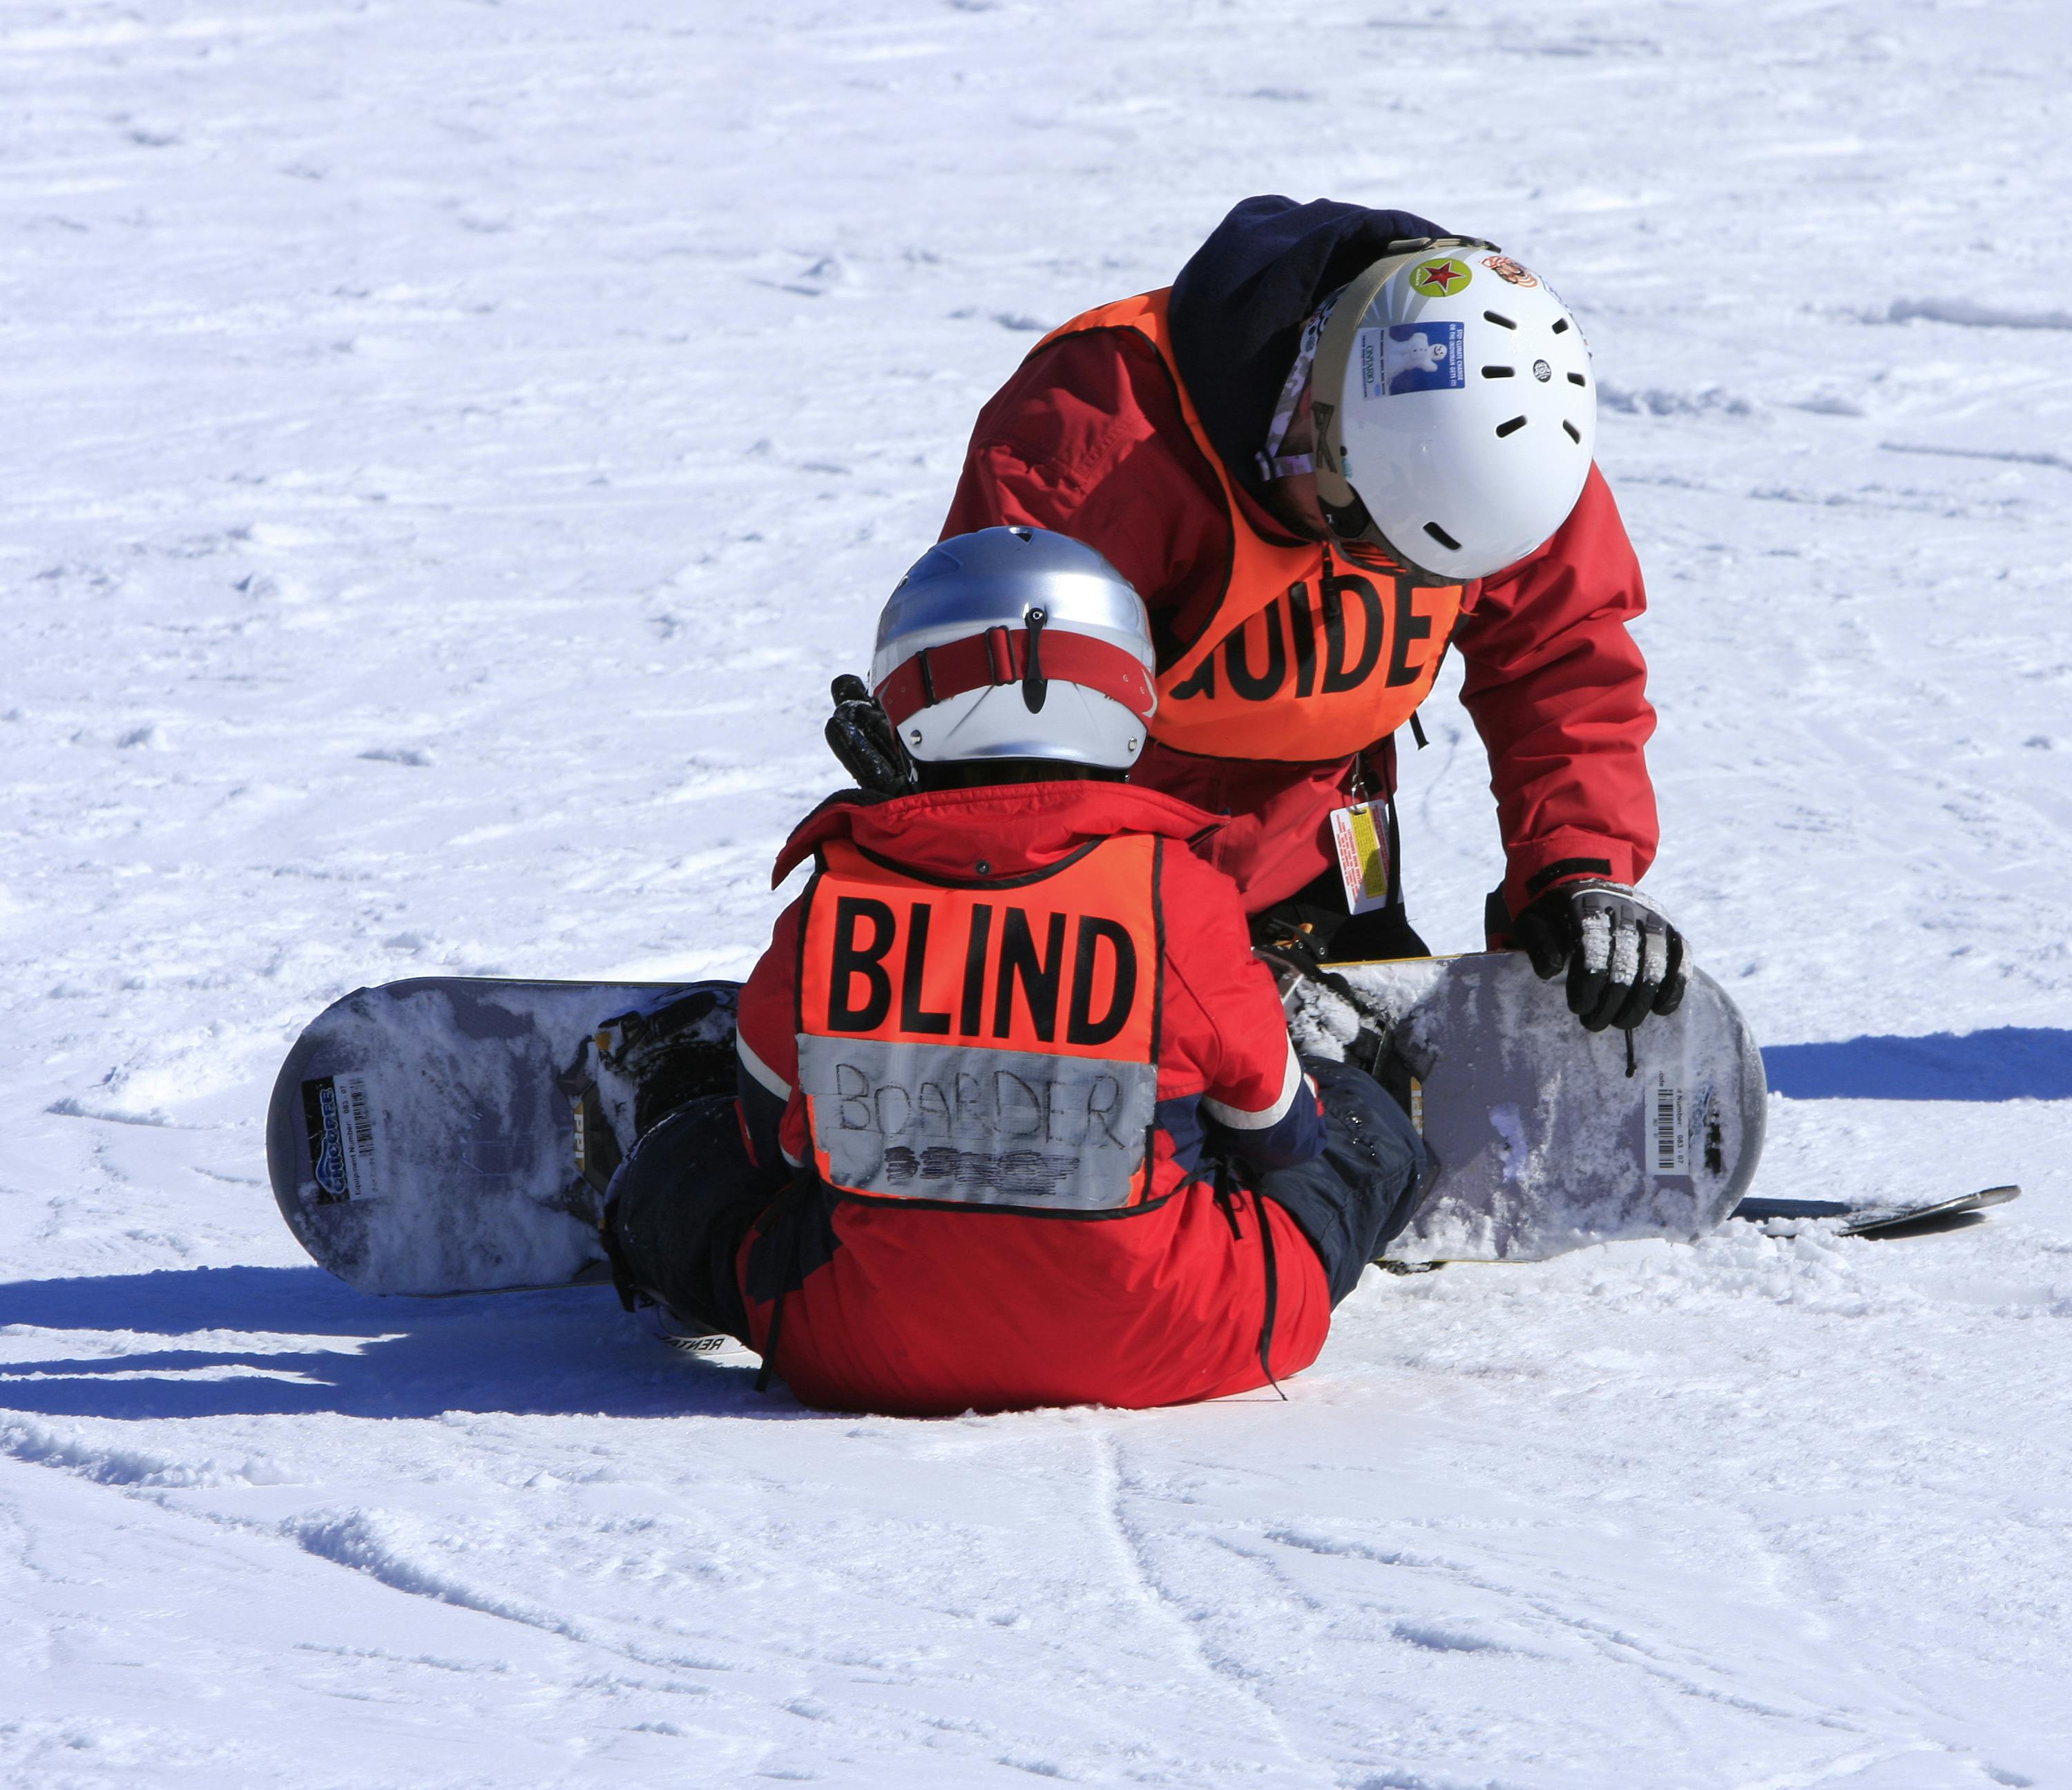 A snowboarder wearing a "Blind Boarder" vest and their guide (wearing a "Guide" vest), sitting on the hill adjusting bindings. 